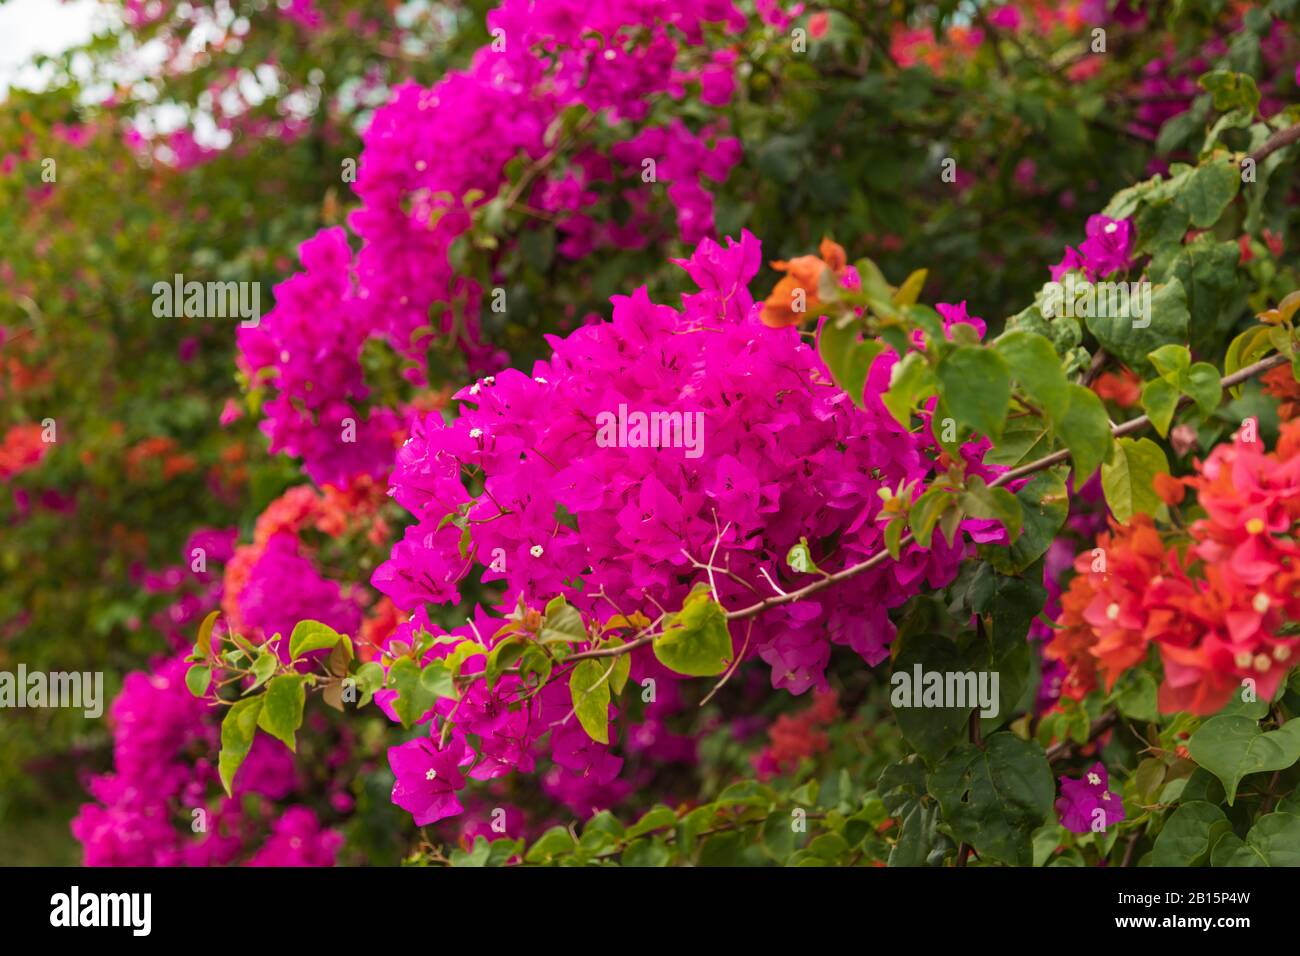 Elegant bright pink bougainvillea flowers of various colors among bright green leaves Stock Photo